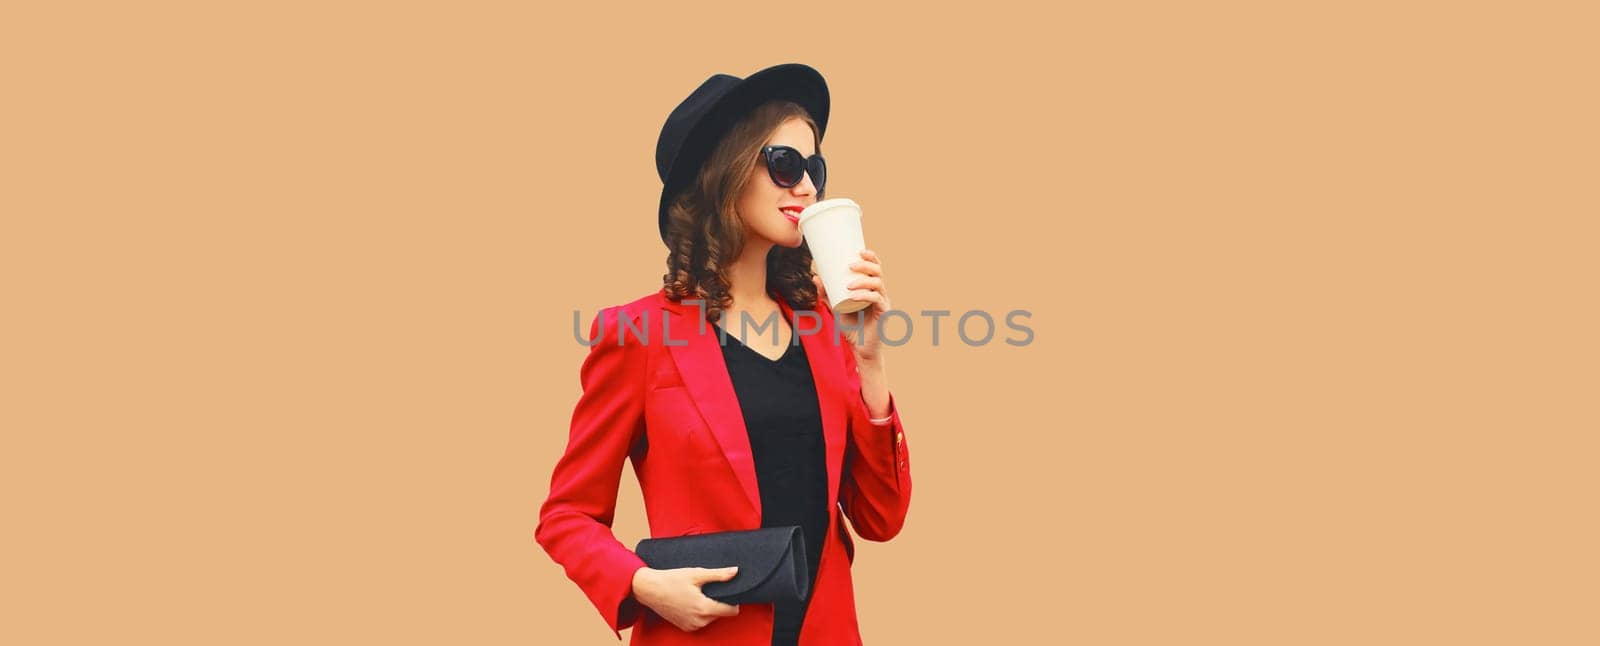 Stylish elegant woman posing in business suit, red blazer jacket, black round hat with handbag clutch looking away isolated on brown studio background